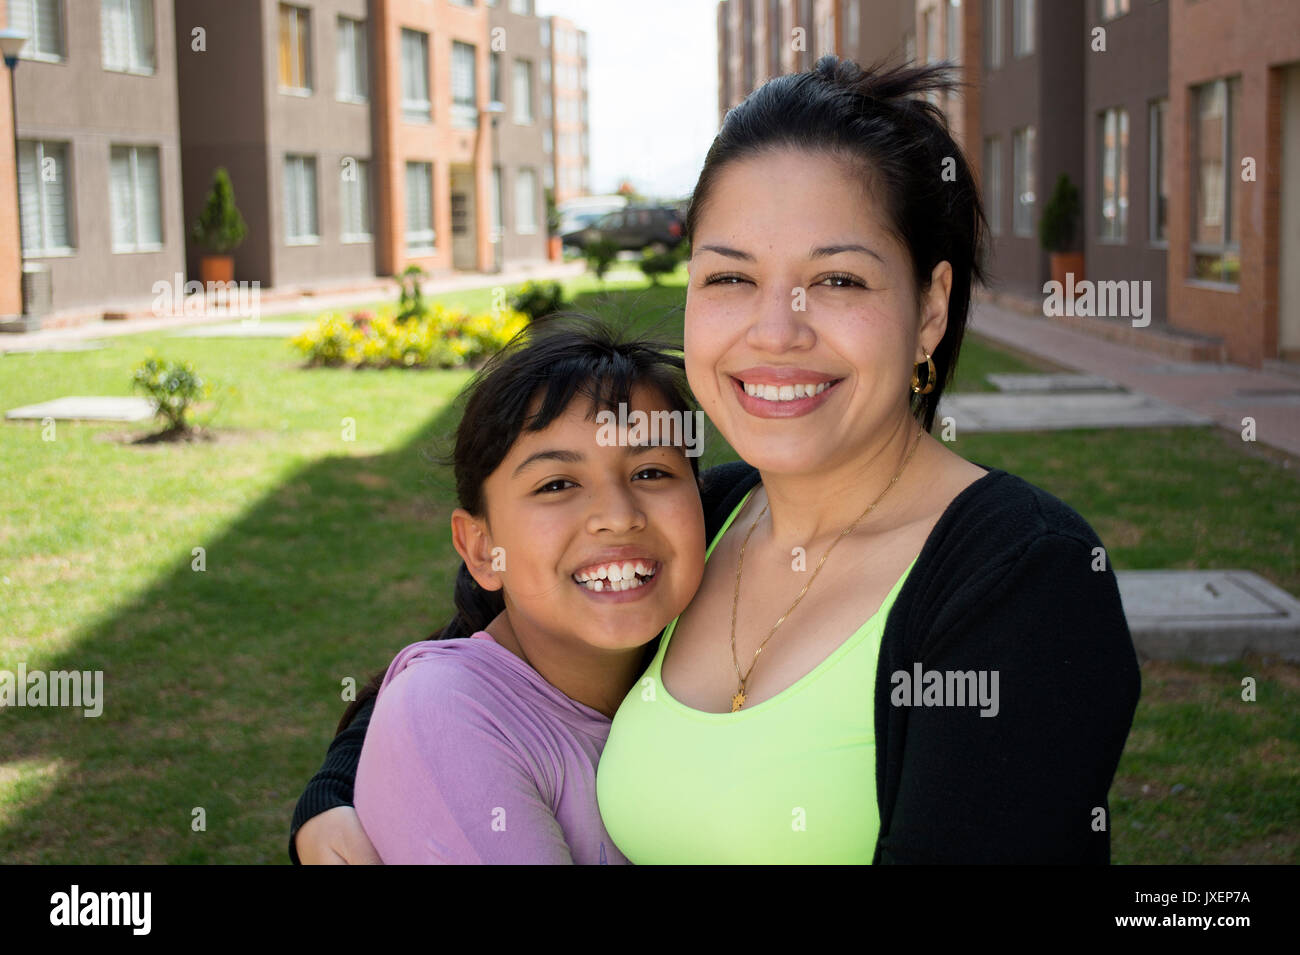 Happy mother and daughter laughing outdoor. Stock Photo